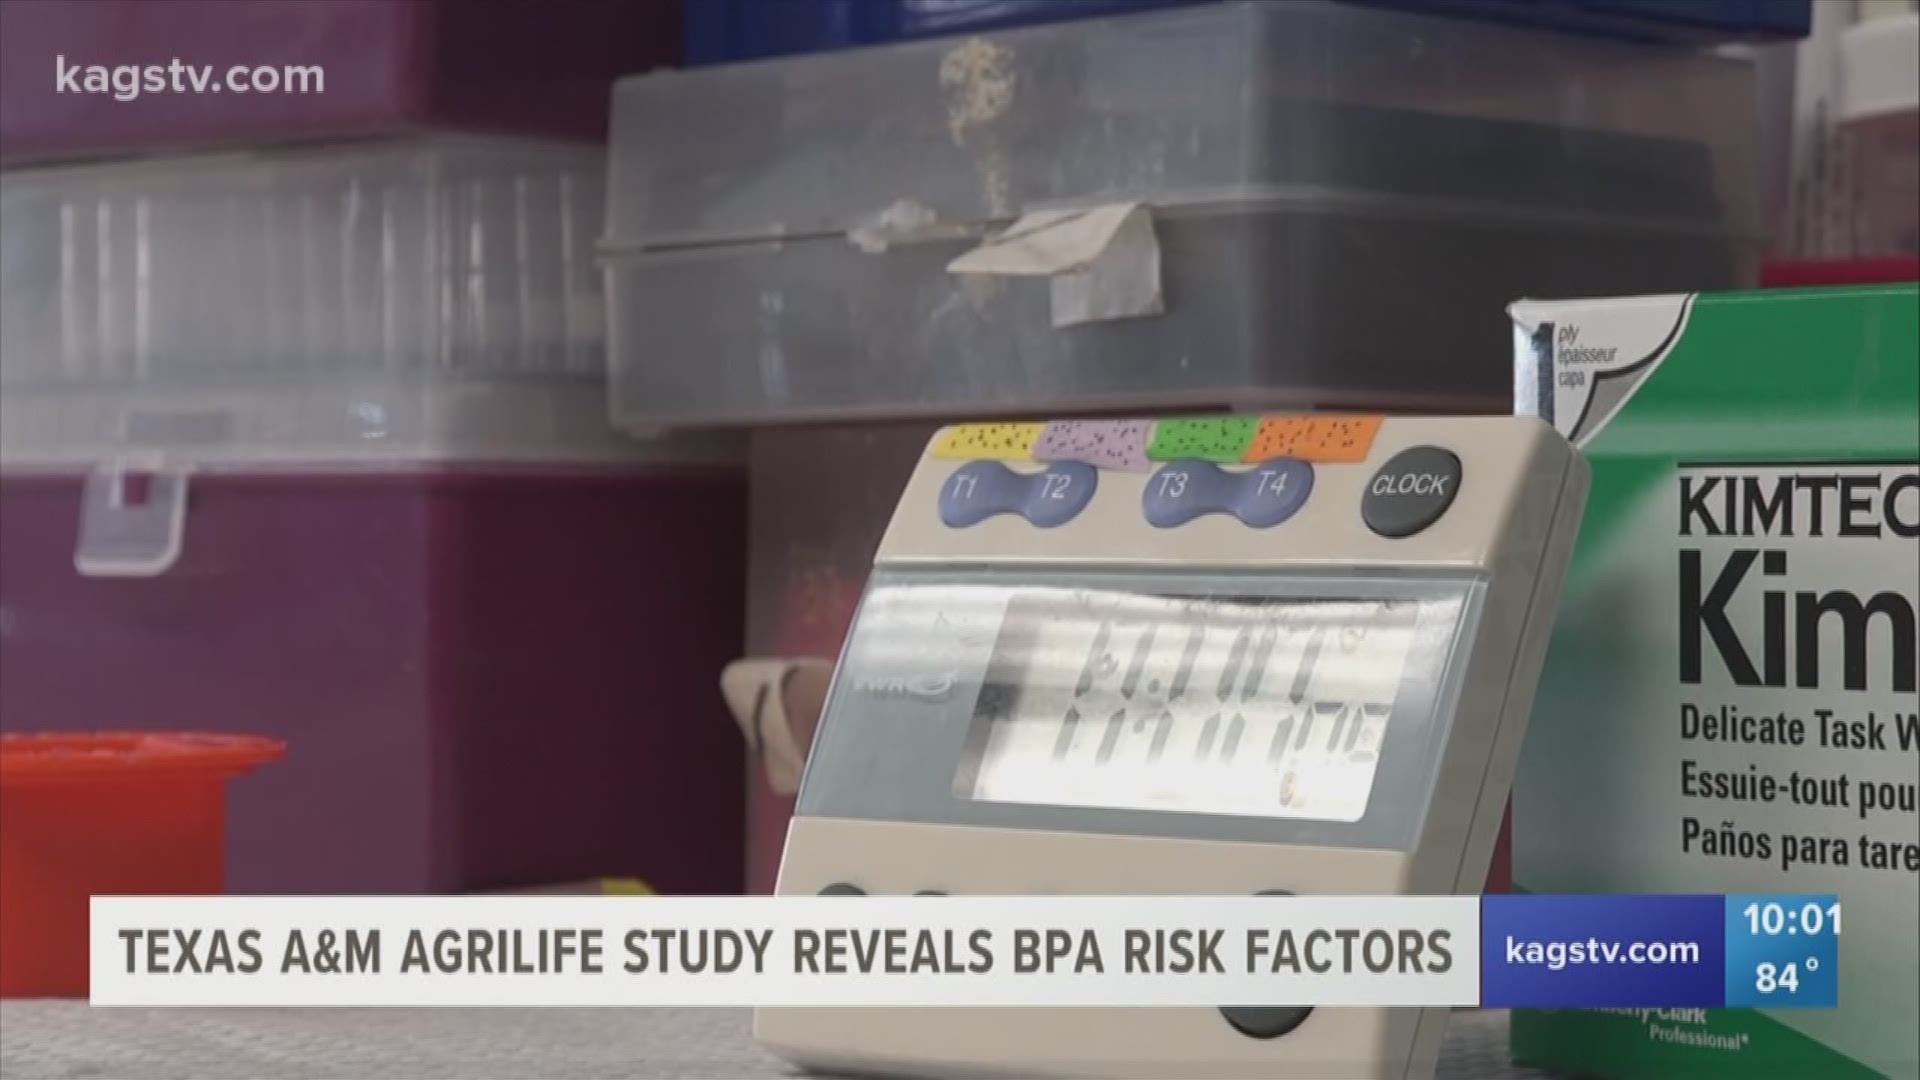 A TAMU study shows BPA can be a risk factor for inflammatory bowel disease.